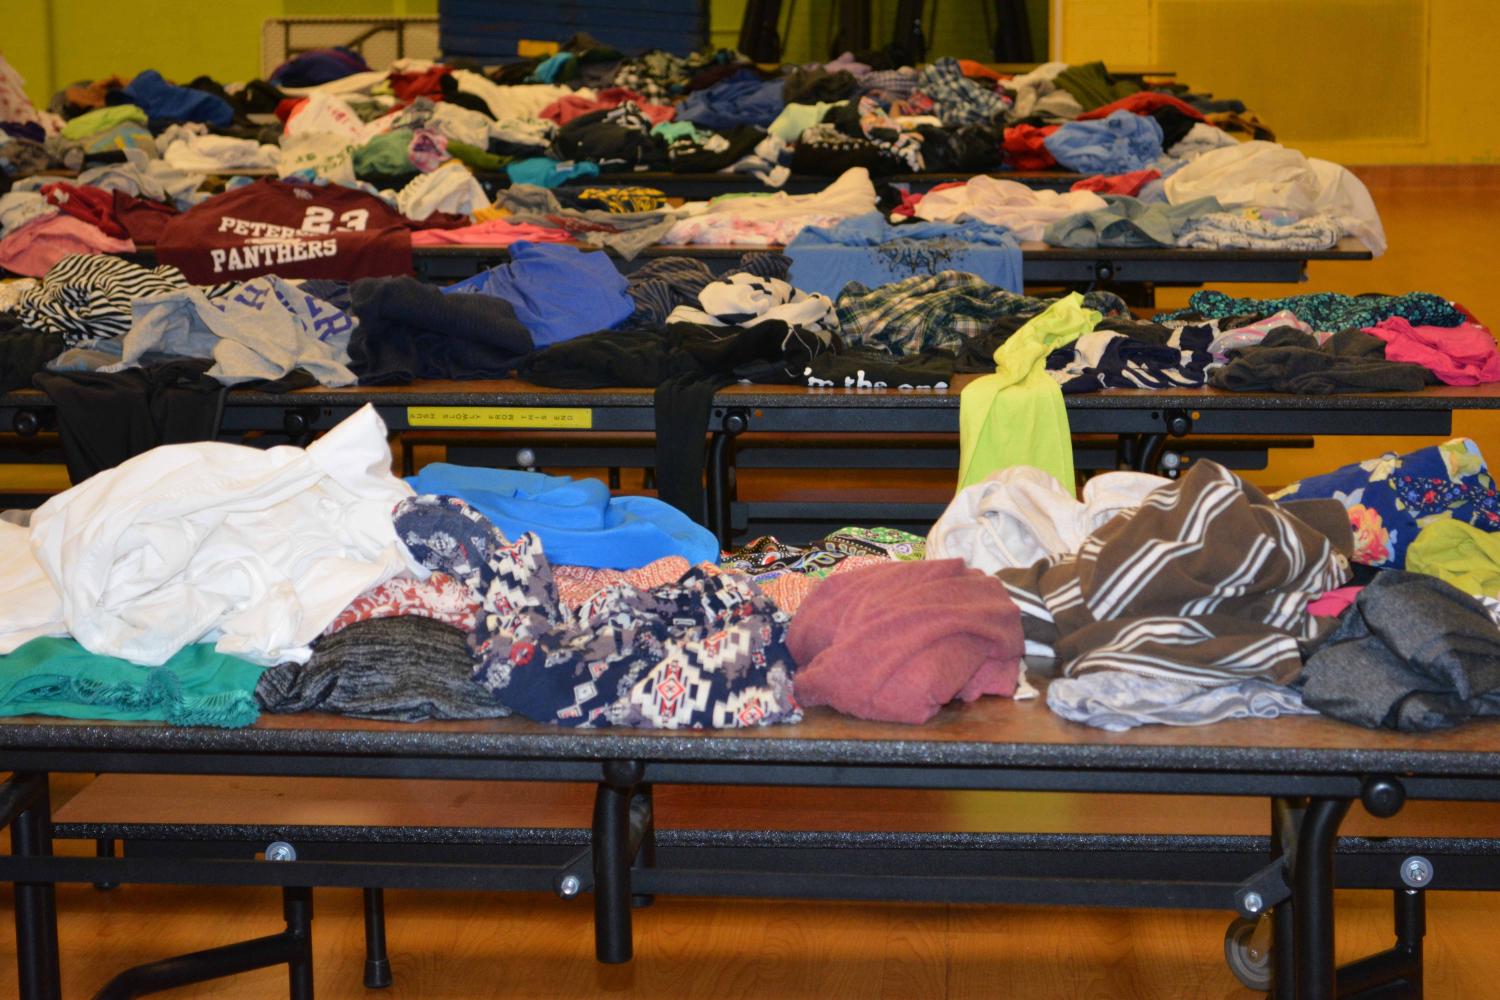 The CPS High School Student Sustainability Board collected clothes donated by students to be sold in a “thrift store” held on April 27-28 for Earth Week. All proceeds went to Build-on.